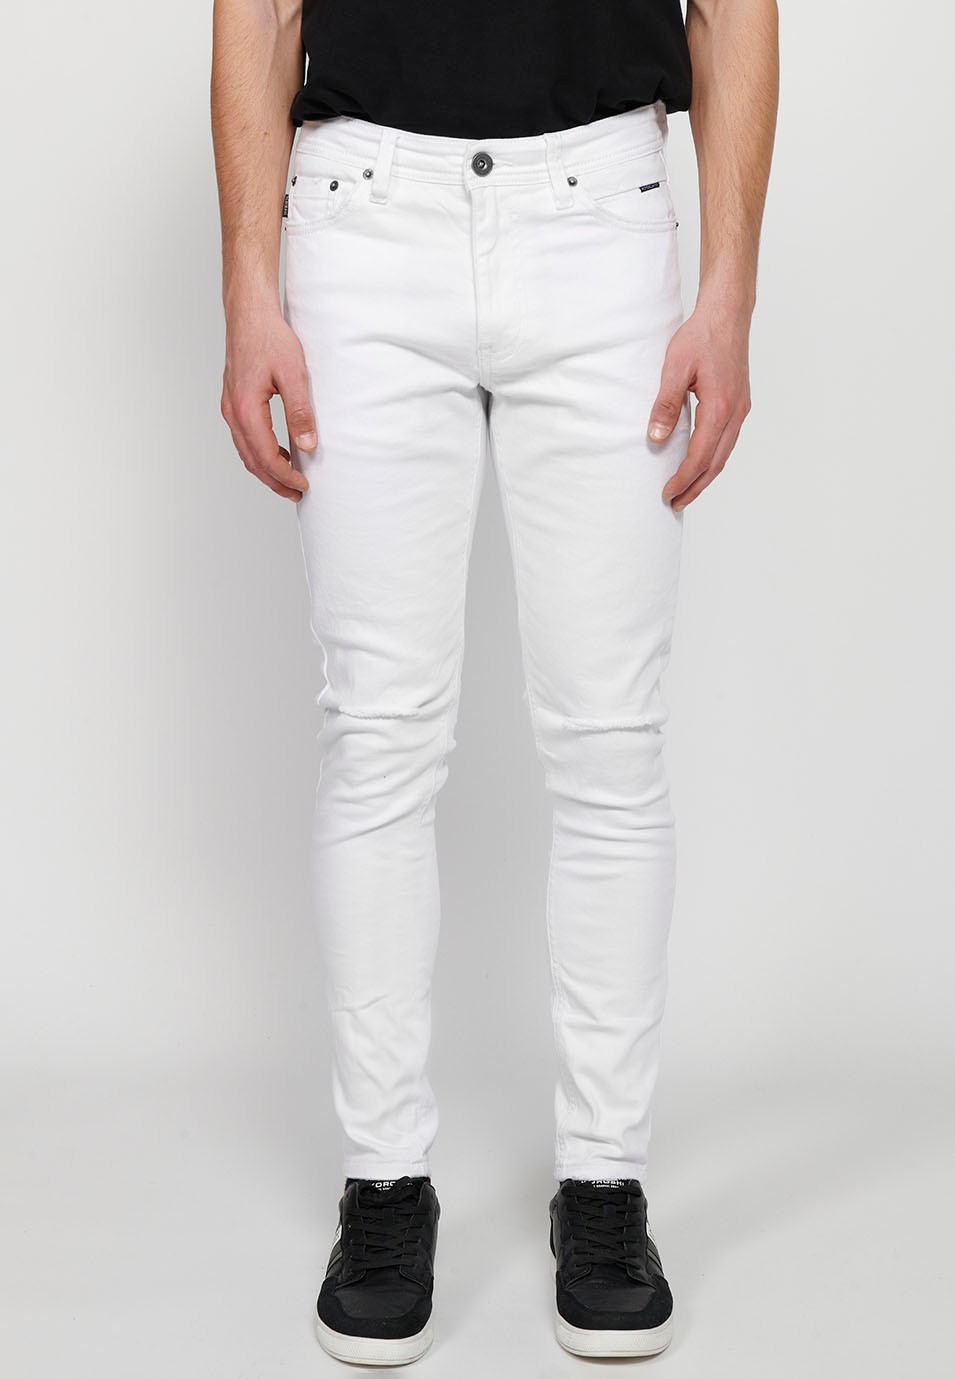 Super skinny jeans with front closure with zipper and button in White Denim for Men 6